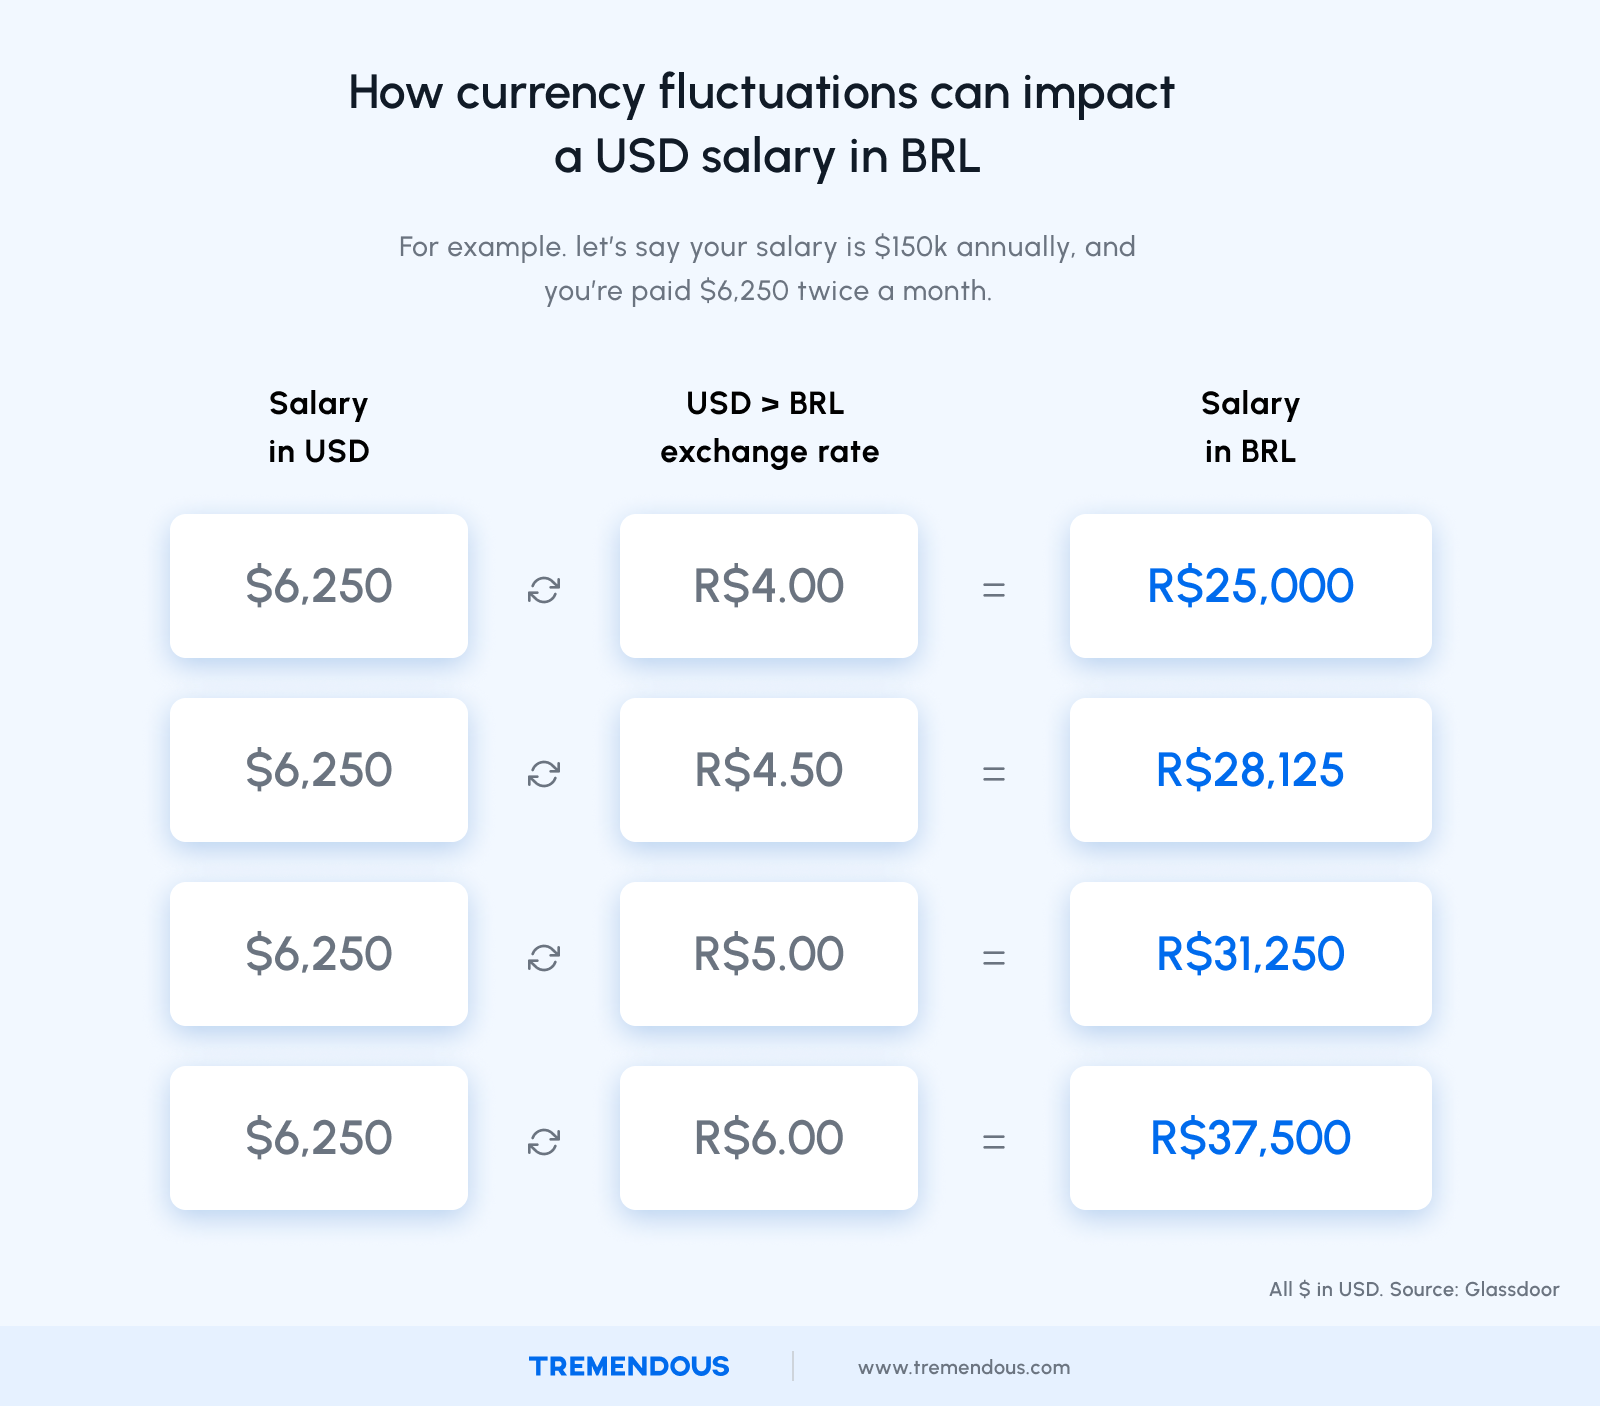 How currency fluctuations can impact a USD salary in BRL